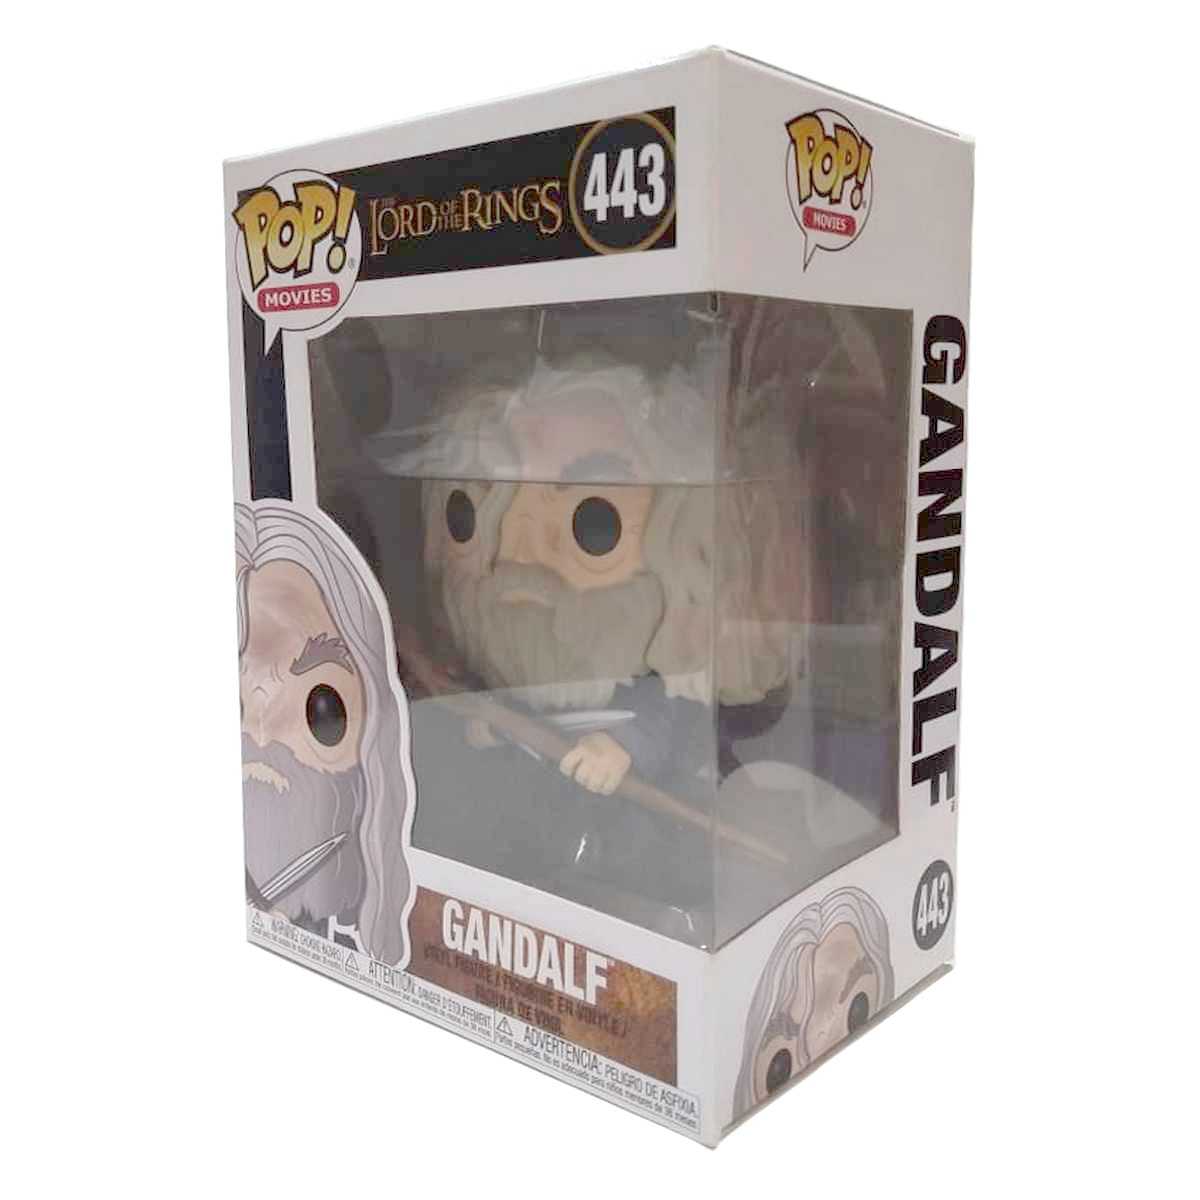 Funko Pop! Movies The Lord of the Rings Gandalf vinyl figure número 443